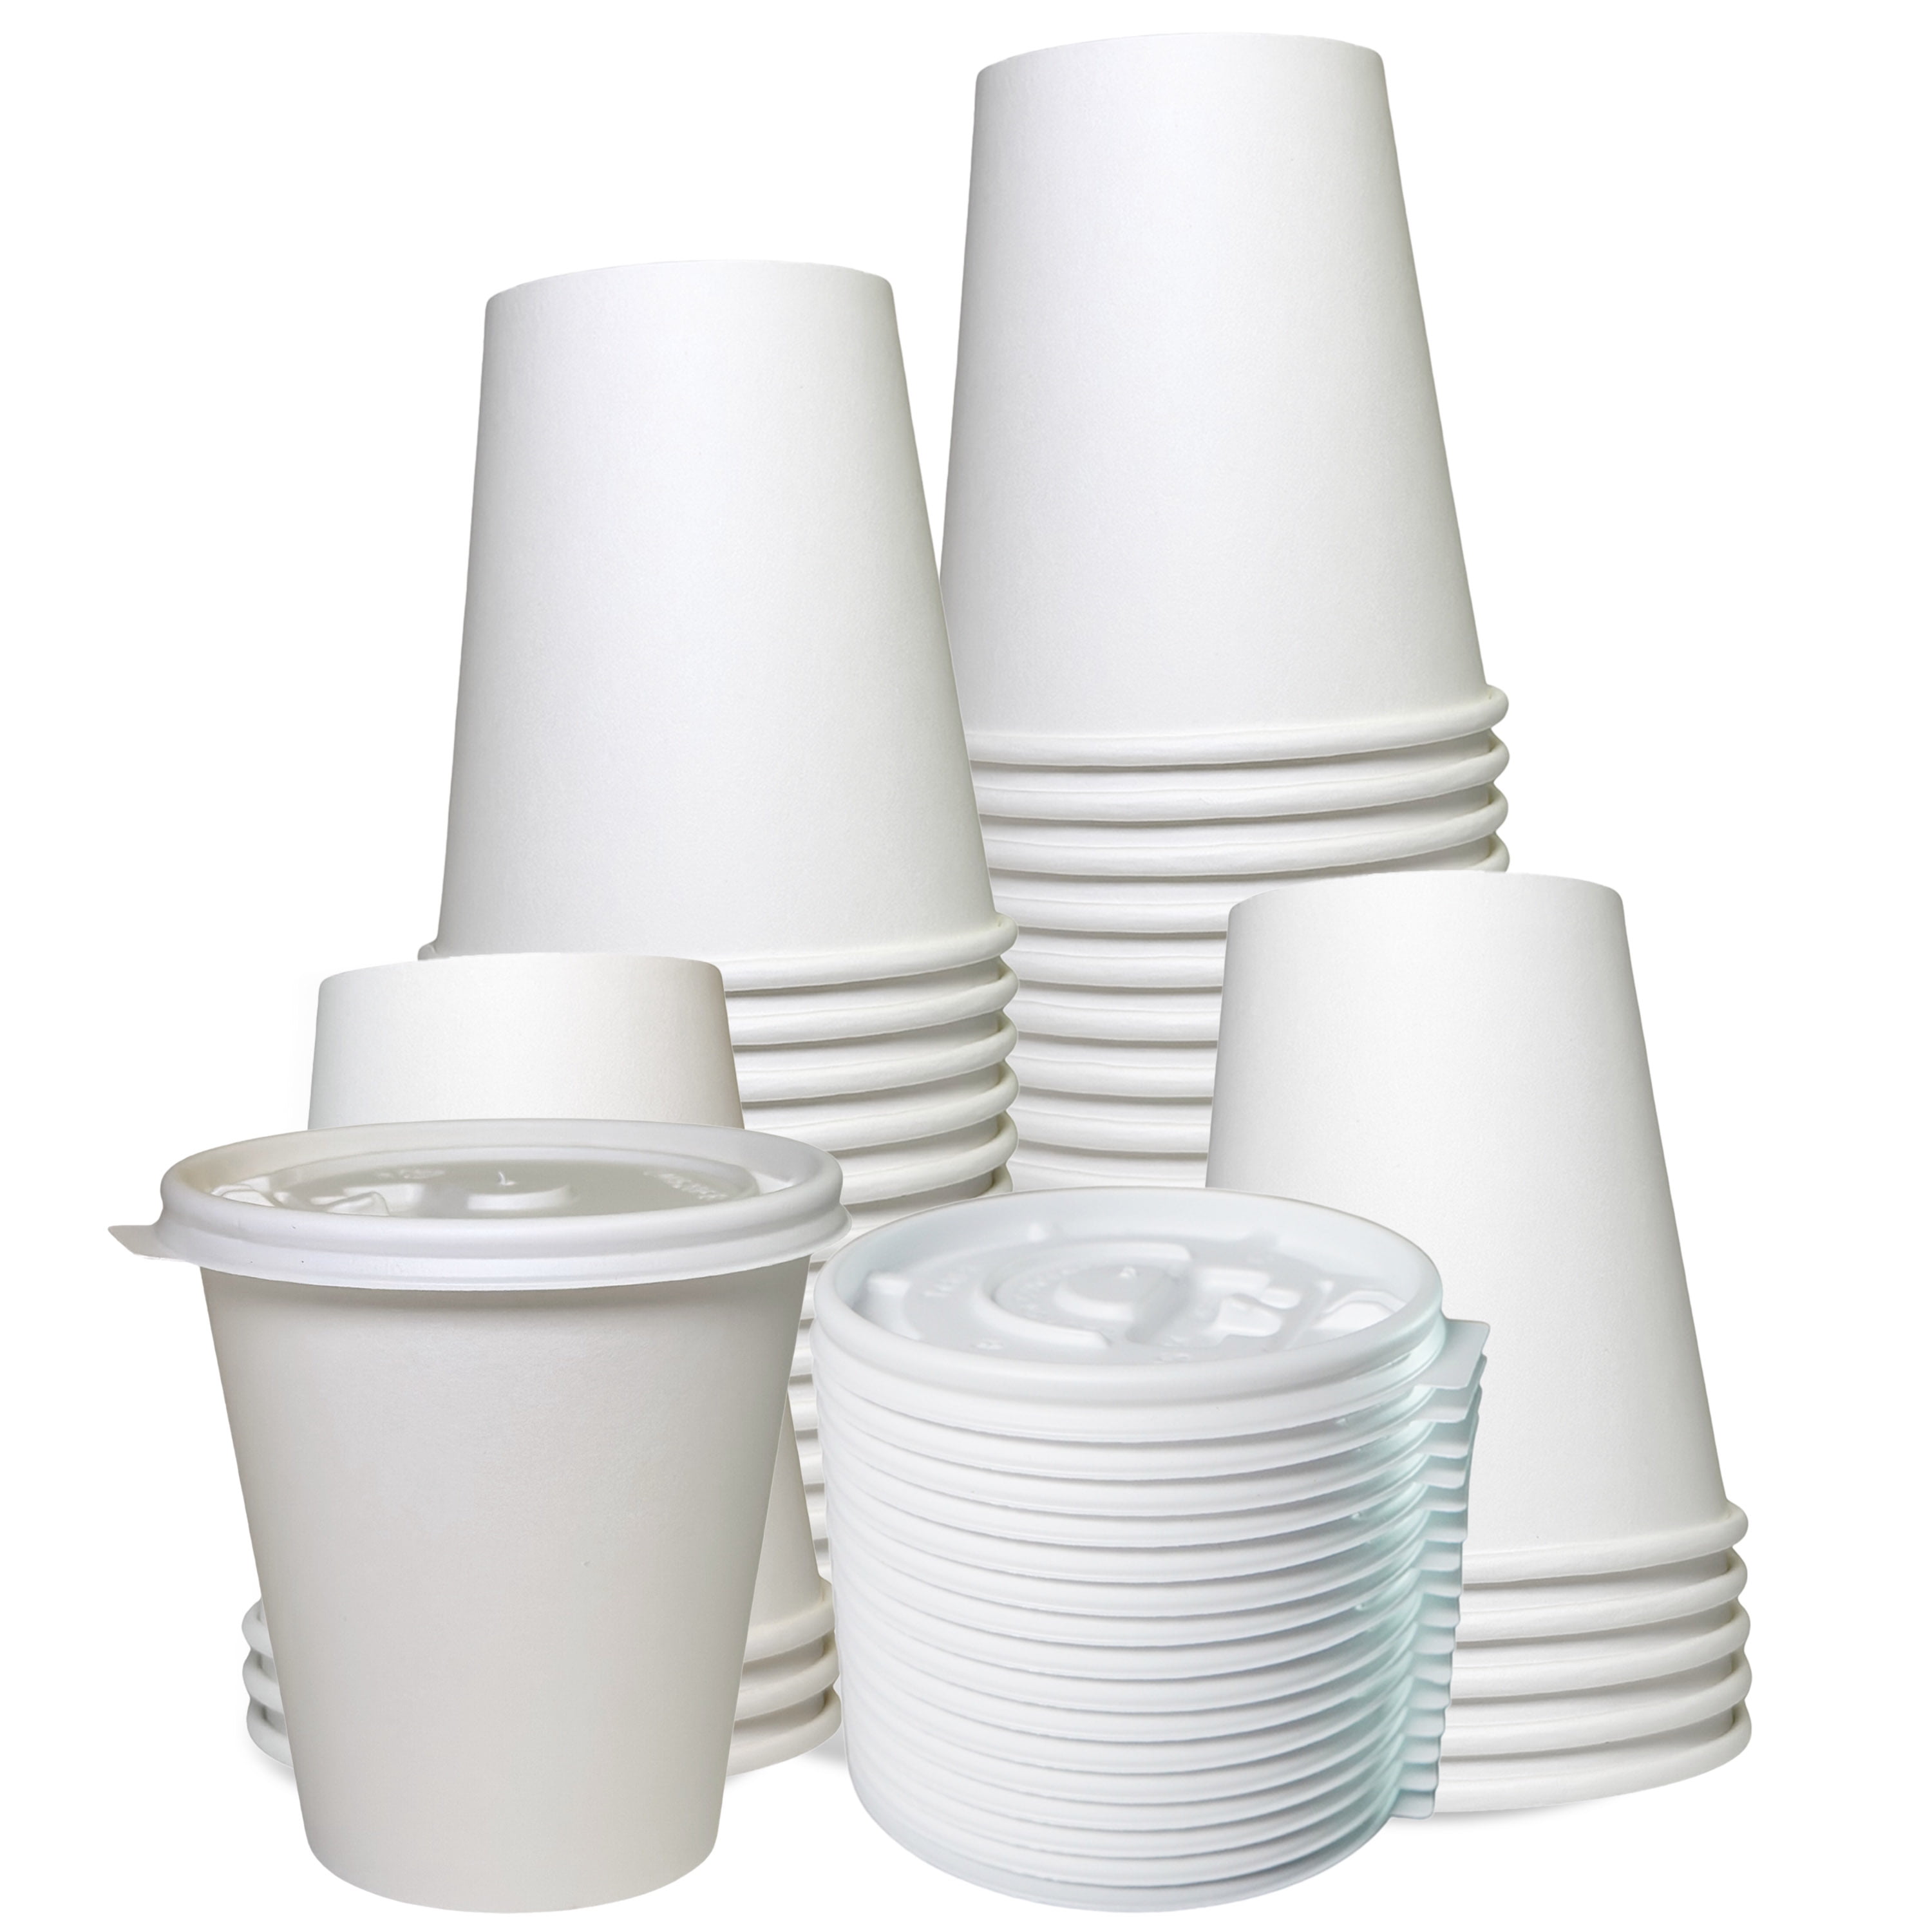 [100 Pack] 12oz Disposable Paper Coffee Cups with White Flat Lids - For  Hot, Cold Drink, Coffee, Tea, Cocoa, Travel, Office, Home, Cider, Hot